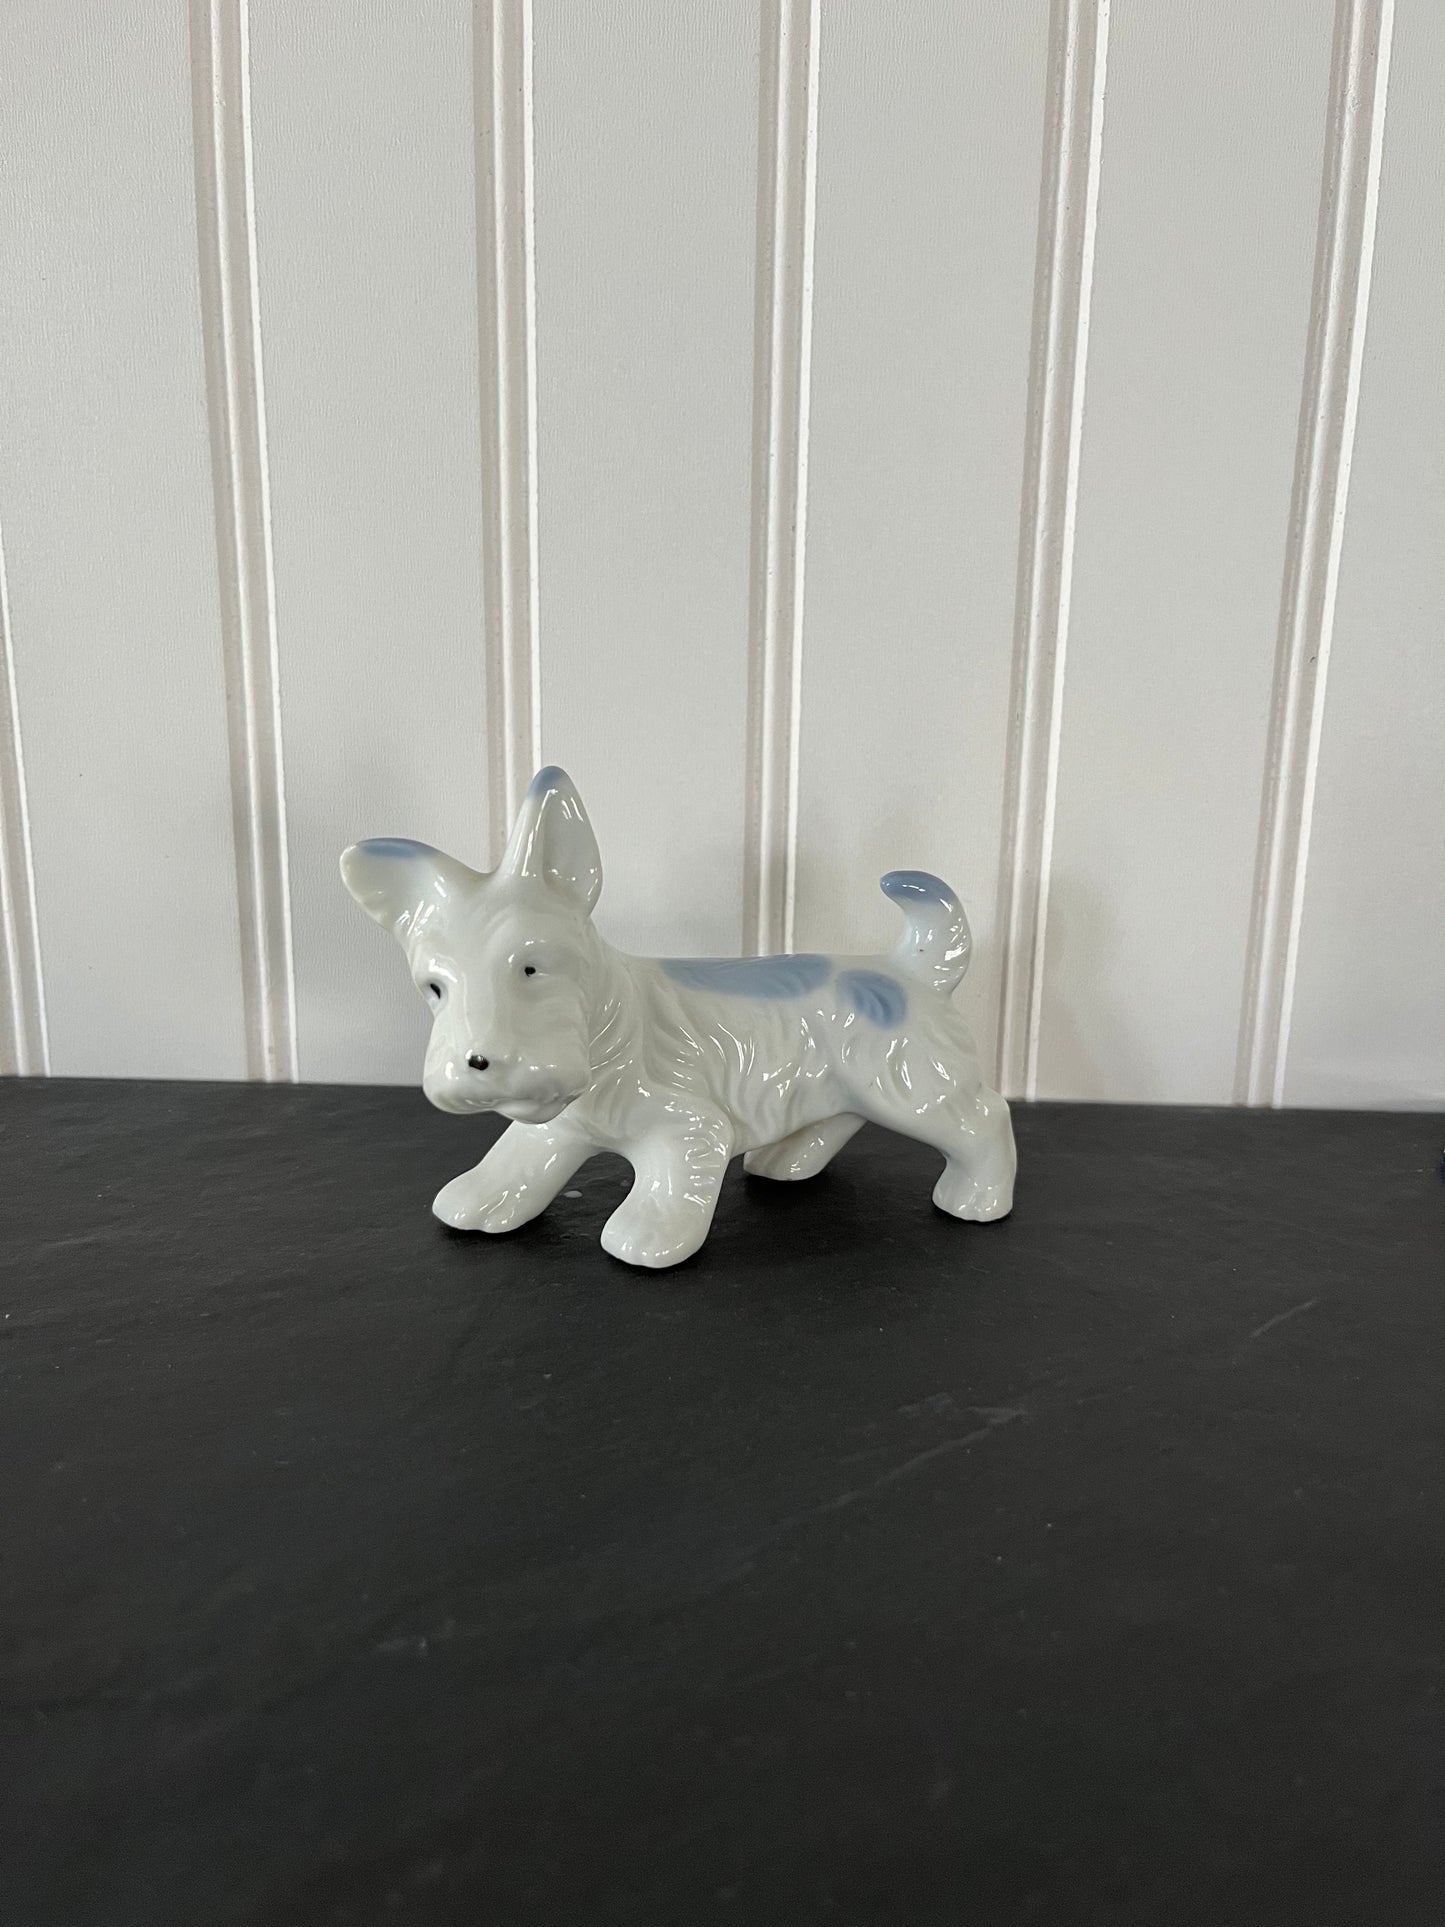 Vintage Scottish Terrier White and Blue Porcelain Dog Figurine - Classic Collectible